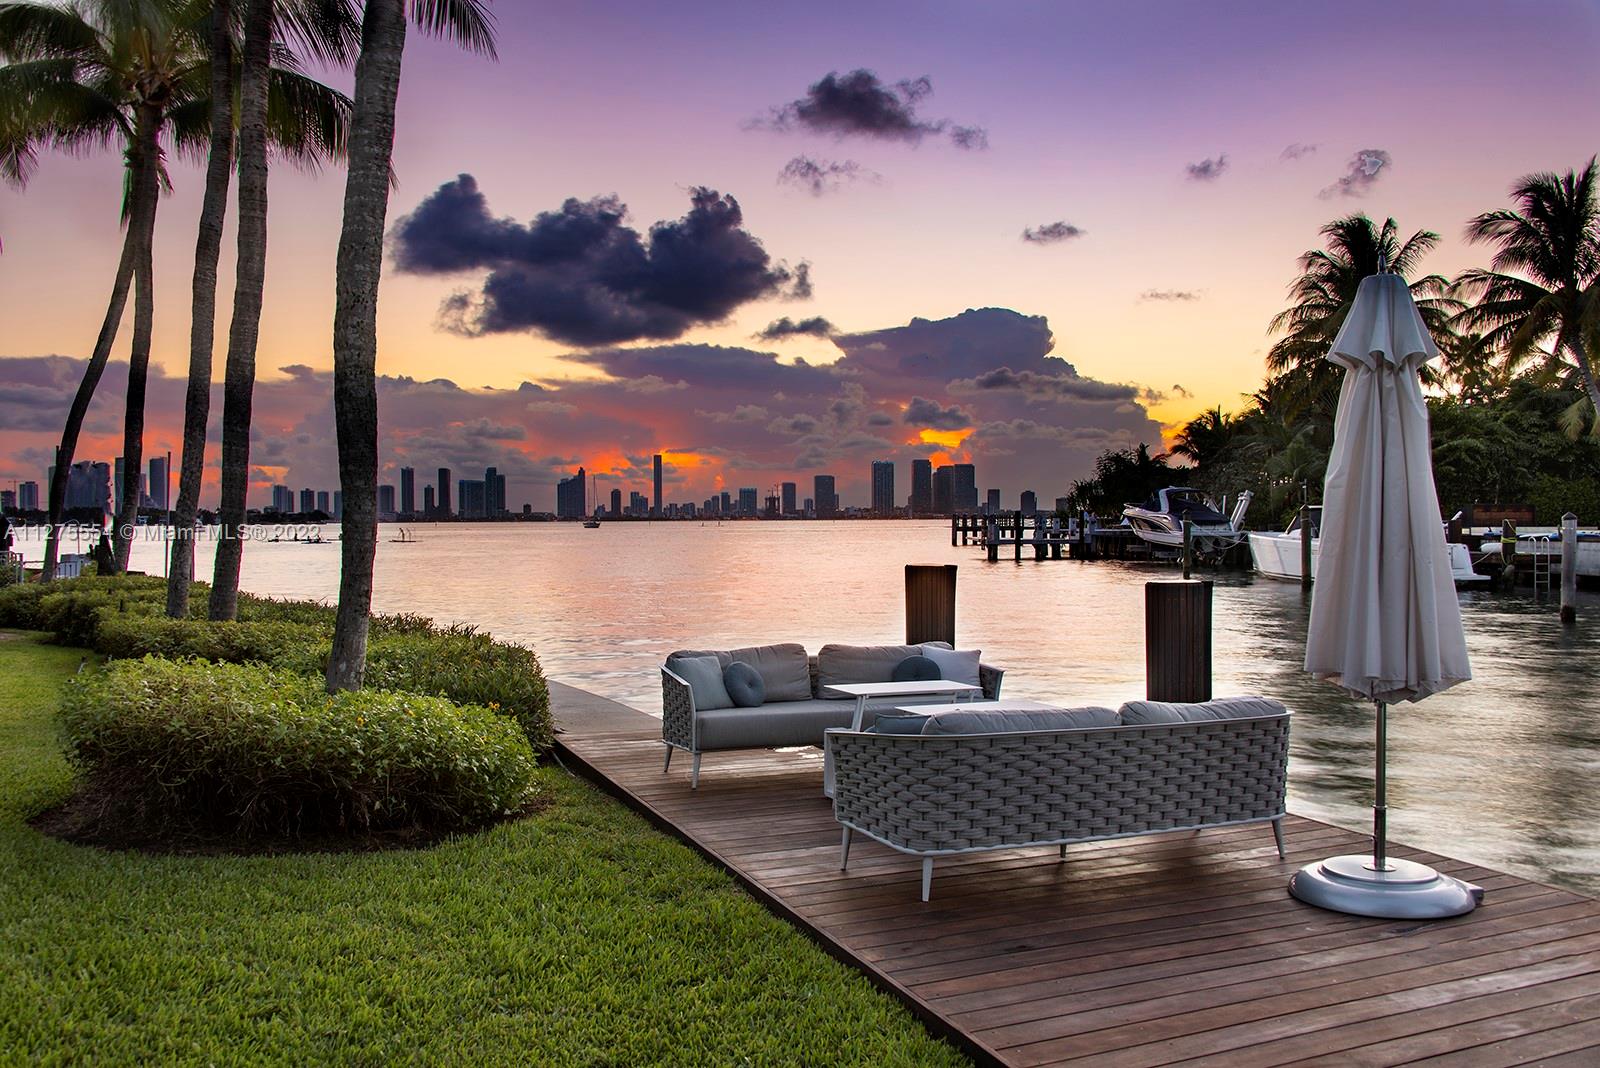 Westerly sunset views located on the coveted and prestigious Gated Sunset Islands, this land offers majestic panoramic views of Biscayne Bay to build your dream home. Plans by starchitect Ralph Choeff included in the sale and near ready to break ground. Luxurious six bedroom 10,385 SF modern home sits on spacious 21,497 sq foot lot, with 140 feet of water frontage. Conveniently situated near Lincoln Road, Sunset Harbor Shops, and high-end restaurants, you will be able to experience a true South Beach lifestyle at your leisure.